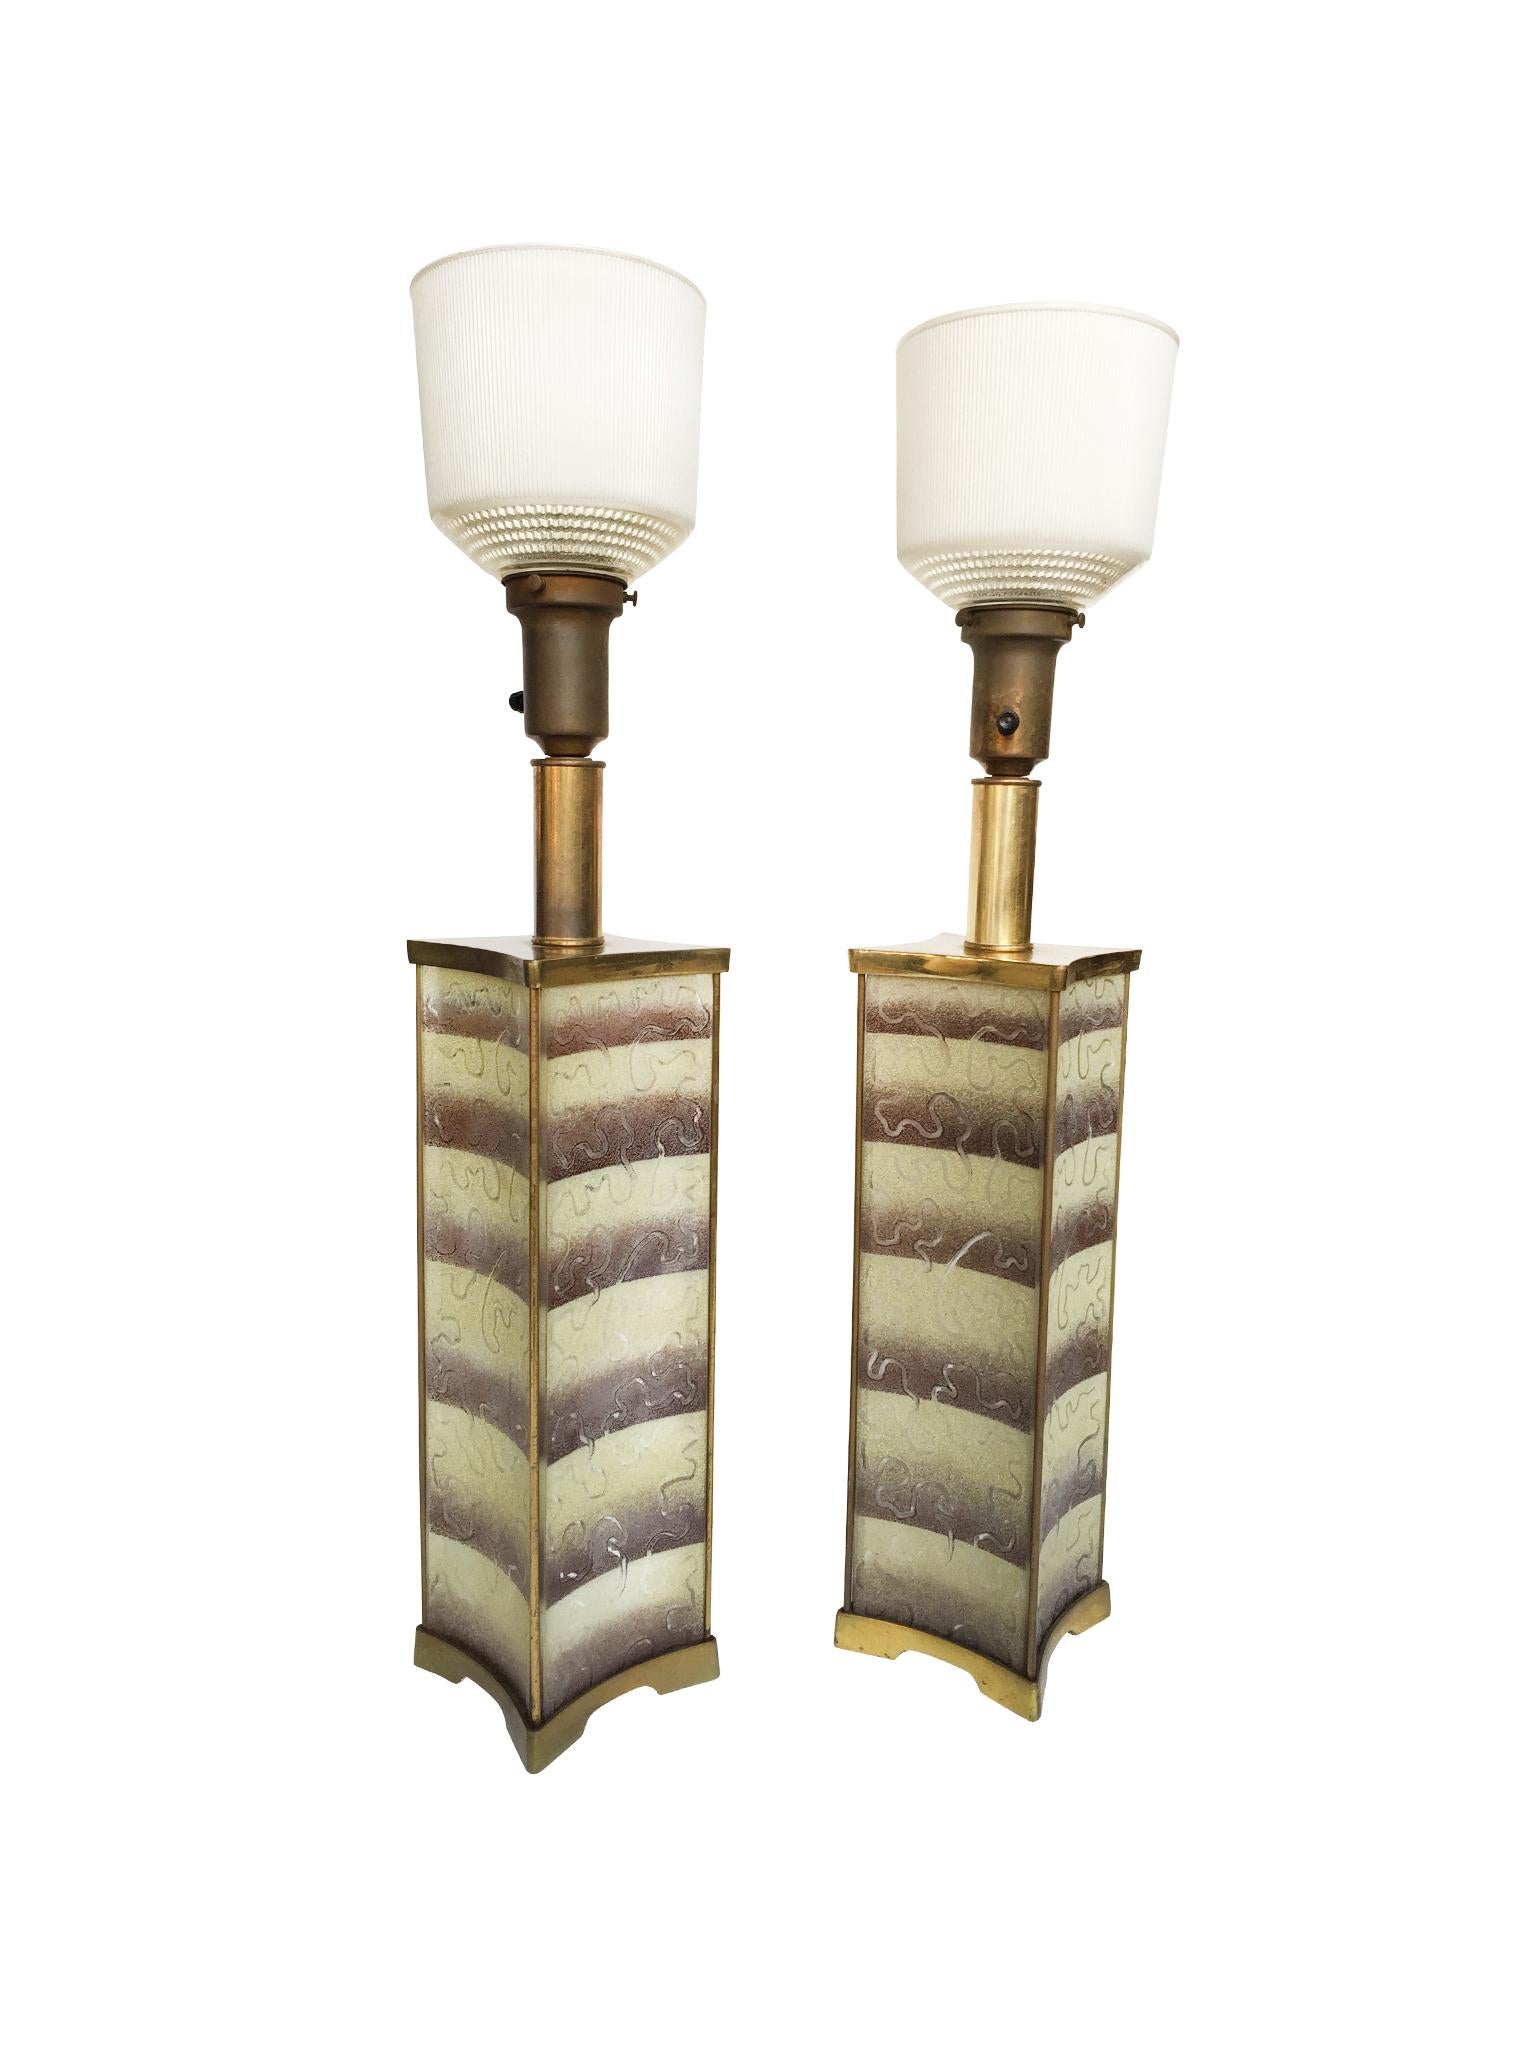 American 1940s Pair of Lightolier Frosted Glass Table Lamps in the Style of James Mont